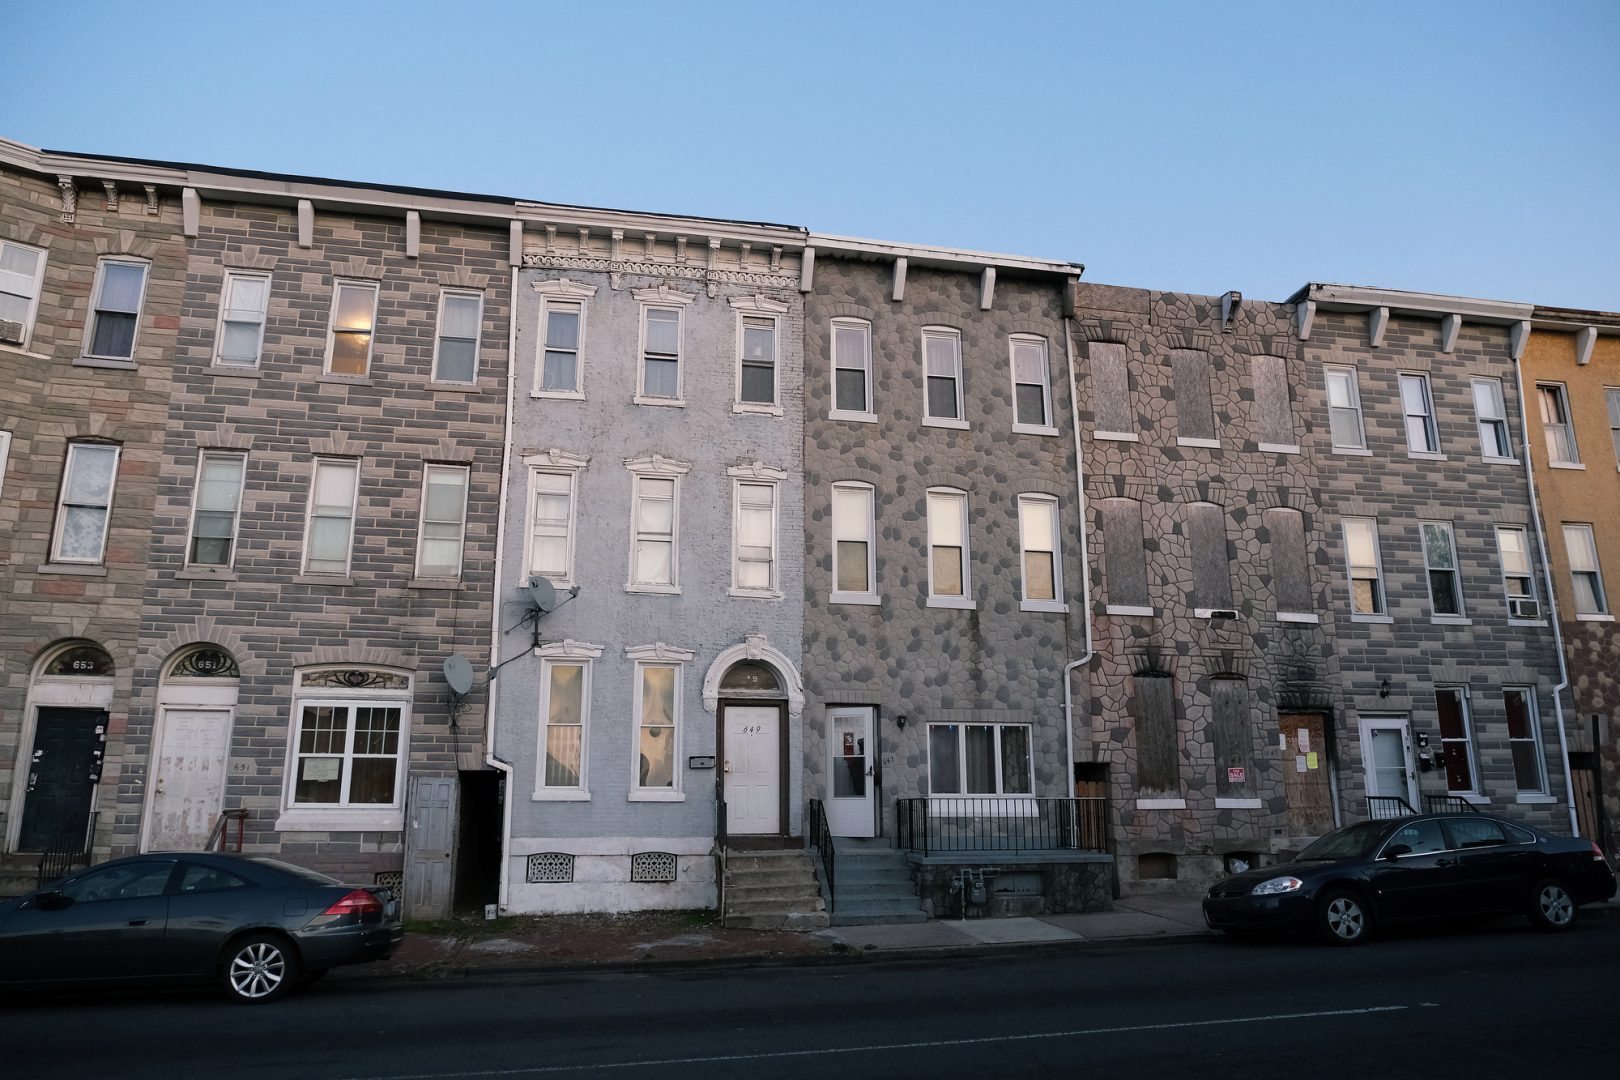 In Reading, Pa. three households are evicted every day, and more than a tenth of all renter households receive an eviction filing.